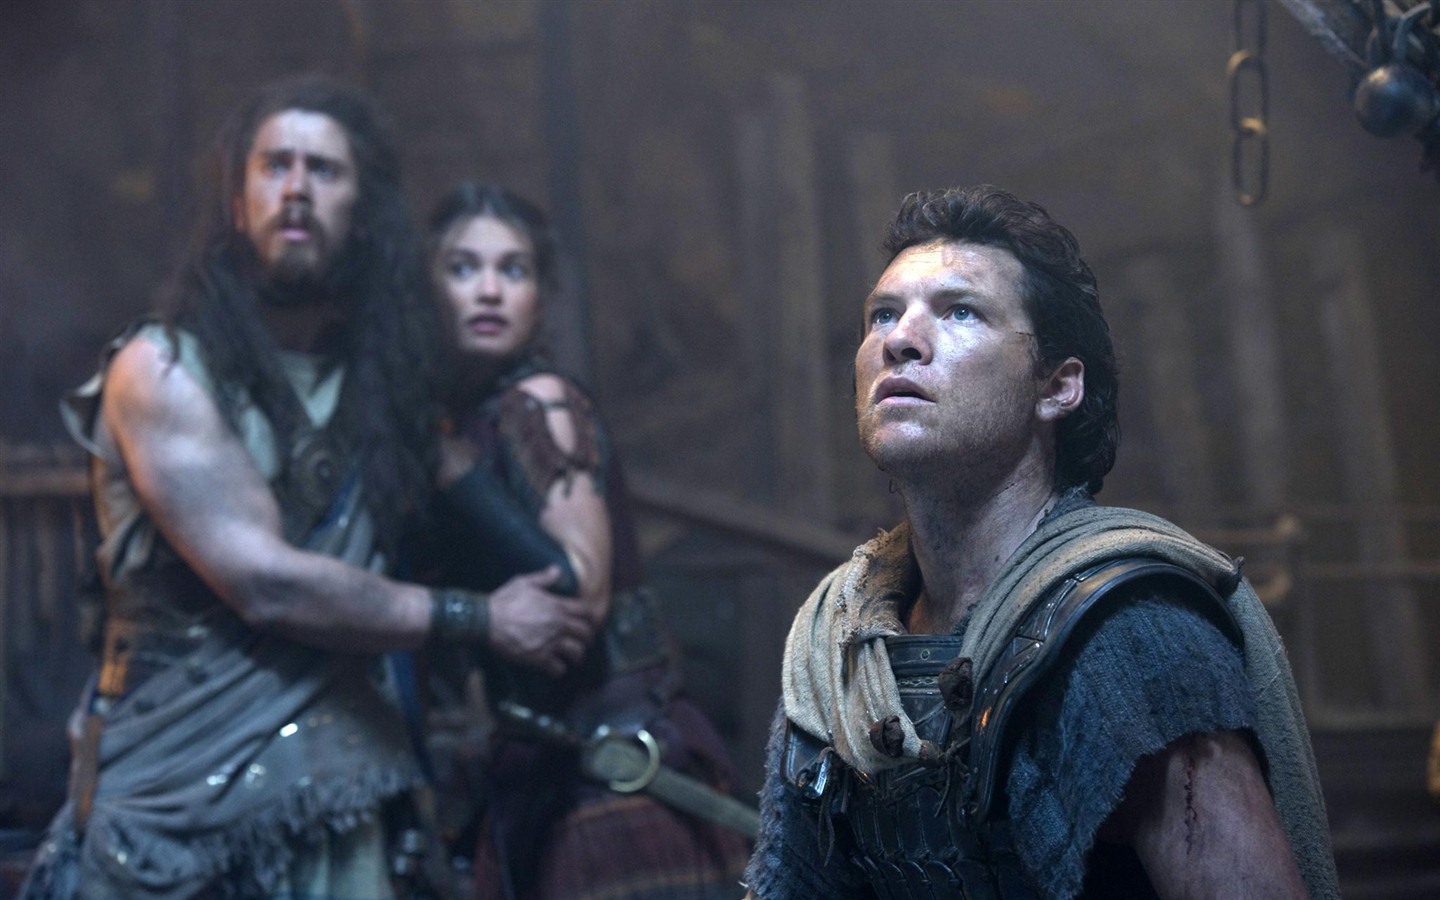 Wrath of the Titans HD Wallpapers #4 - 1440x900